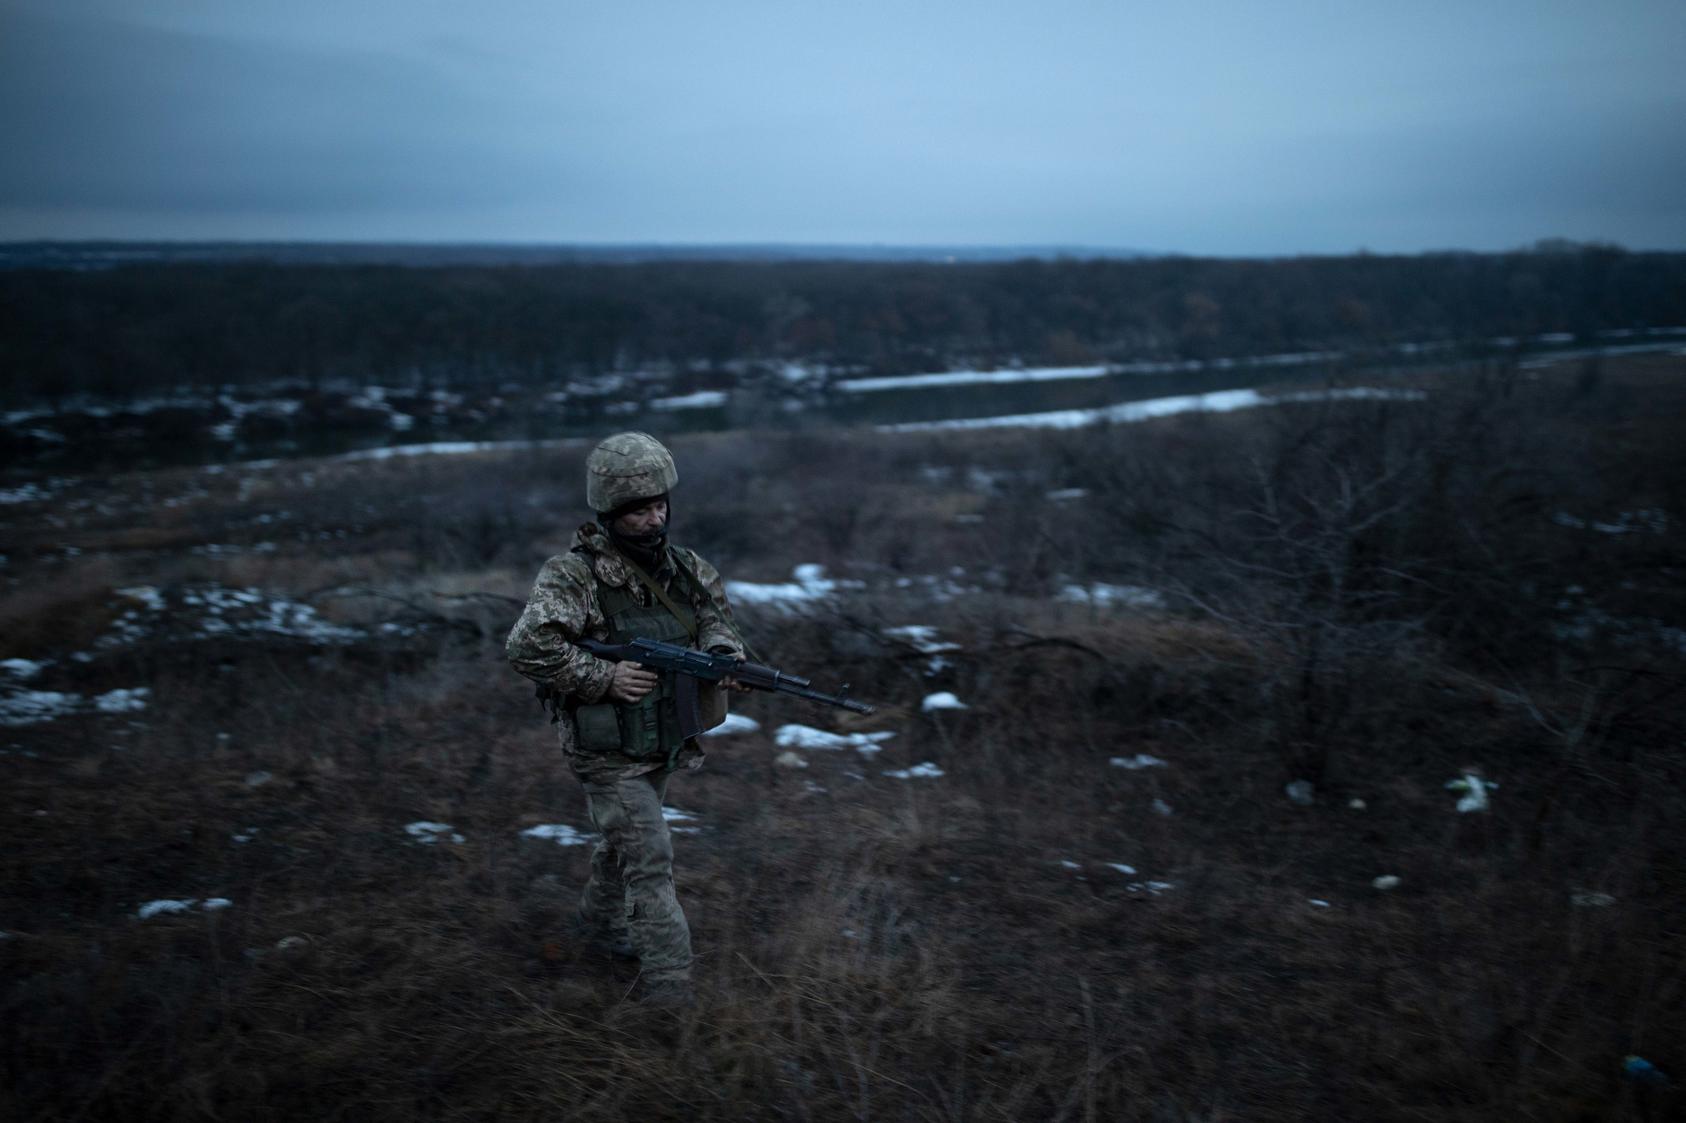 A Ukrainian soldier near Trokhizbenka, in the Luhansk region in the eastern part of the country, Feb. 2, 2022. (Tyler Hicks/The New York Times)